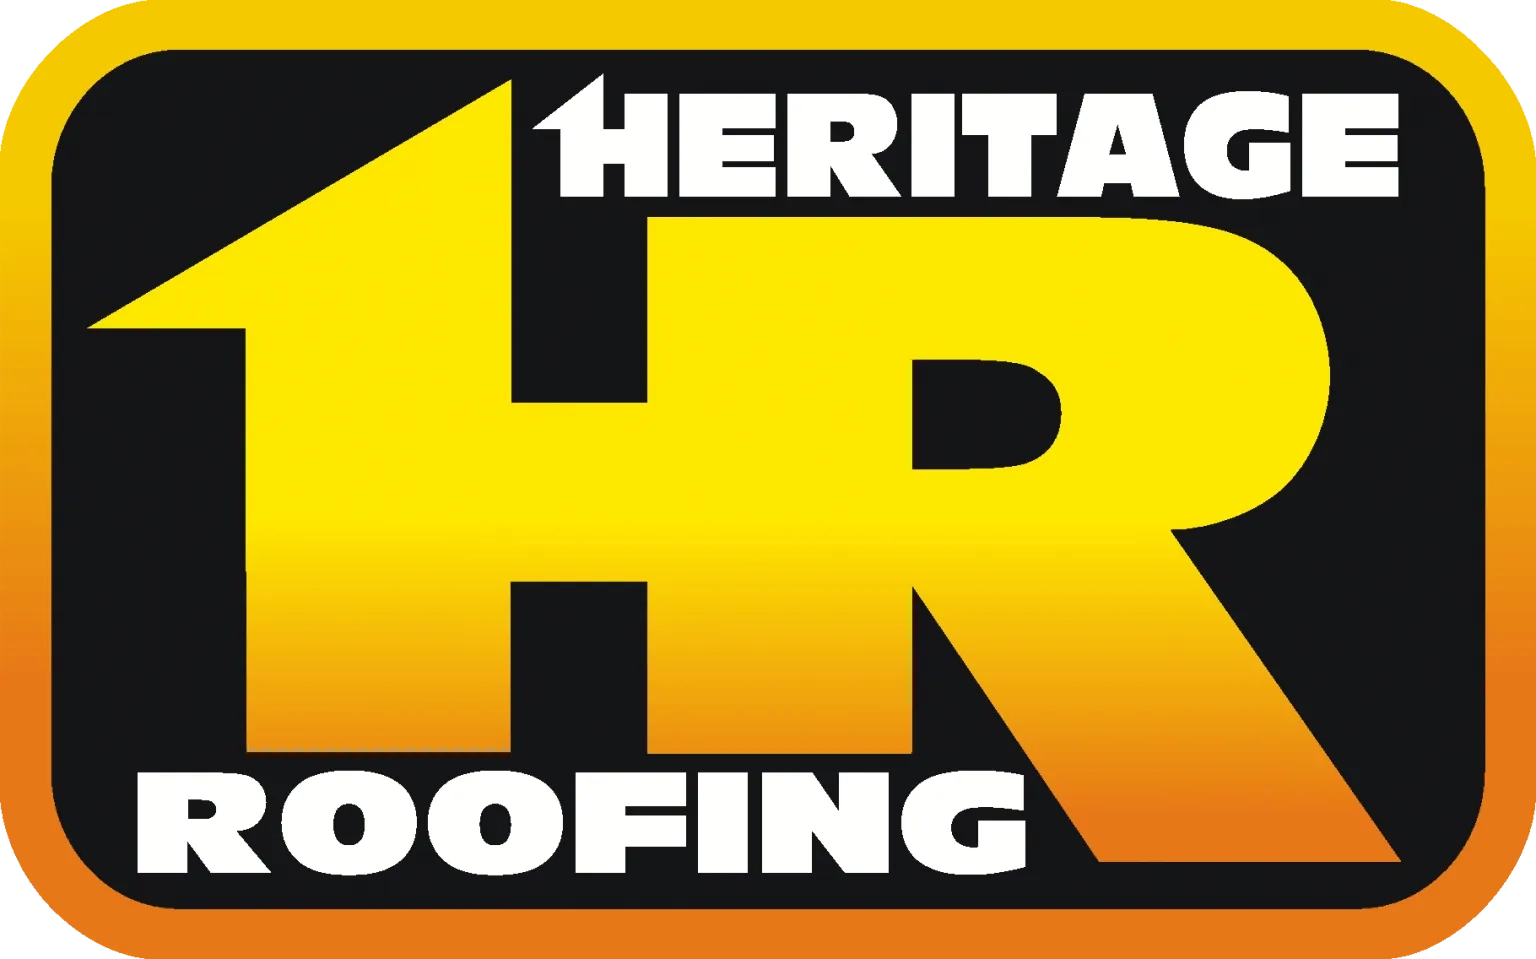 Heritage Roofing Logo